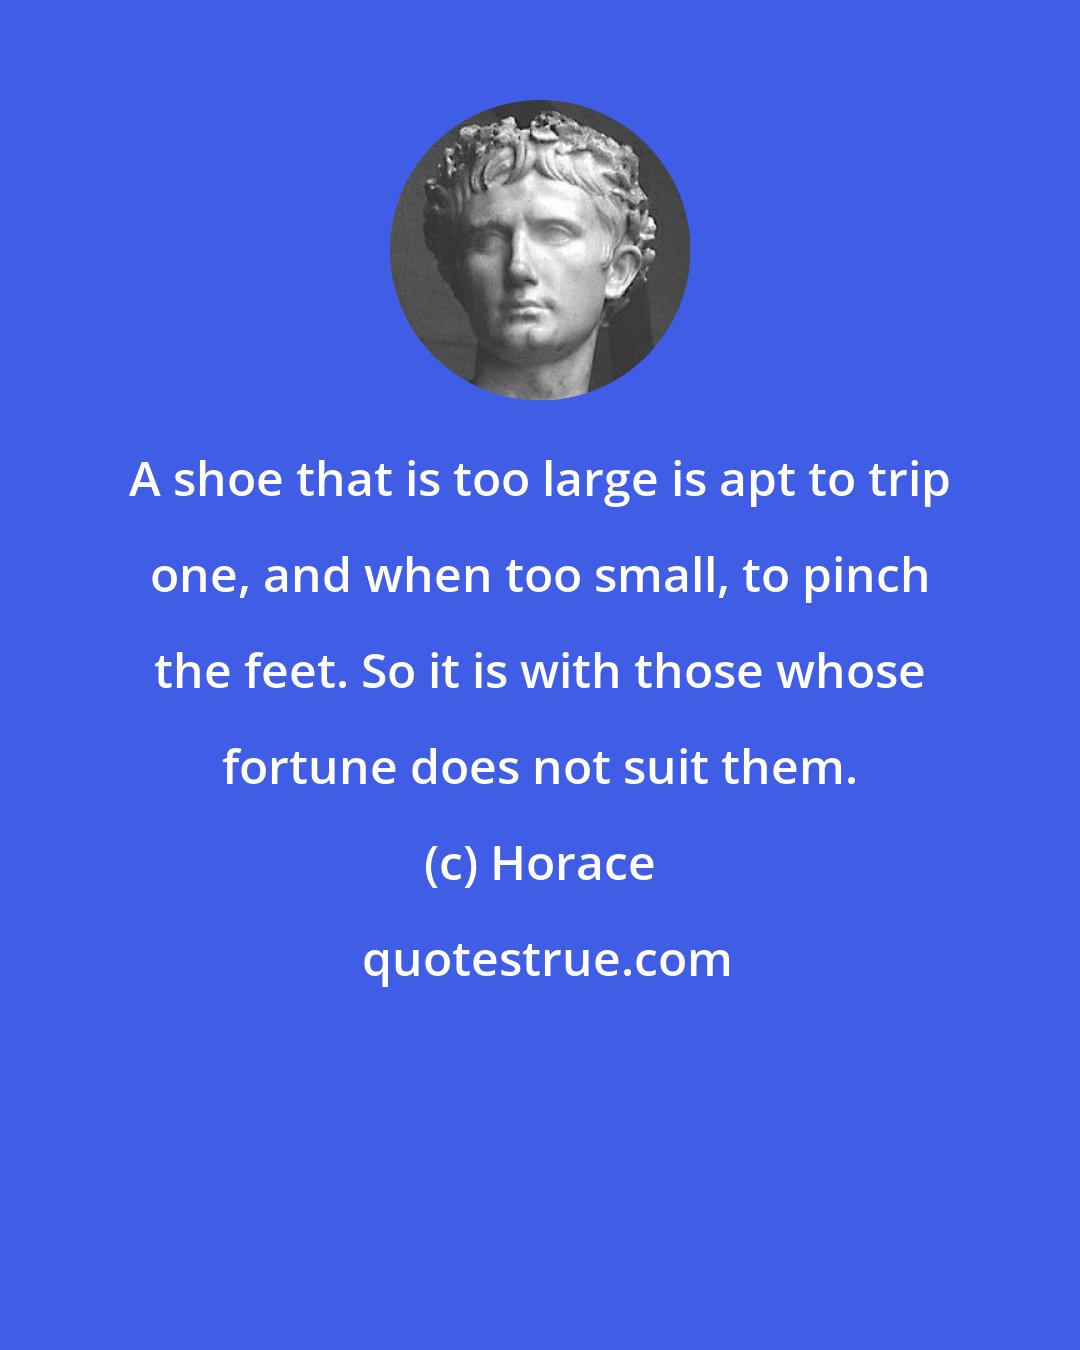 Horace: A shoe that is too large is apt to trip one, and when too small, to pinch the feet. So it is with those whose fortune does not suit them.